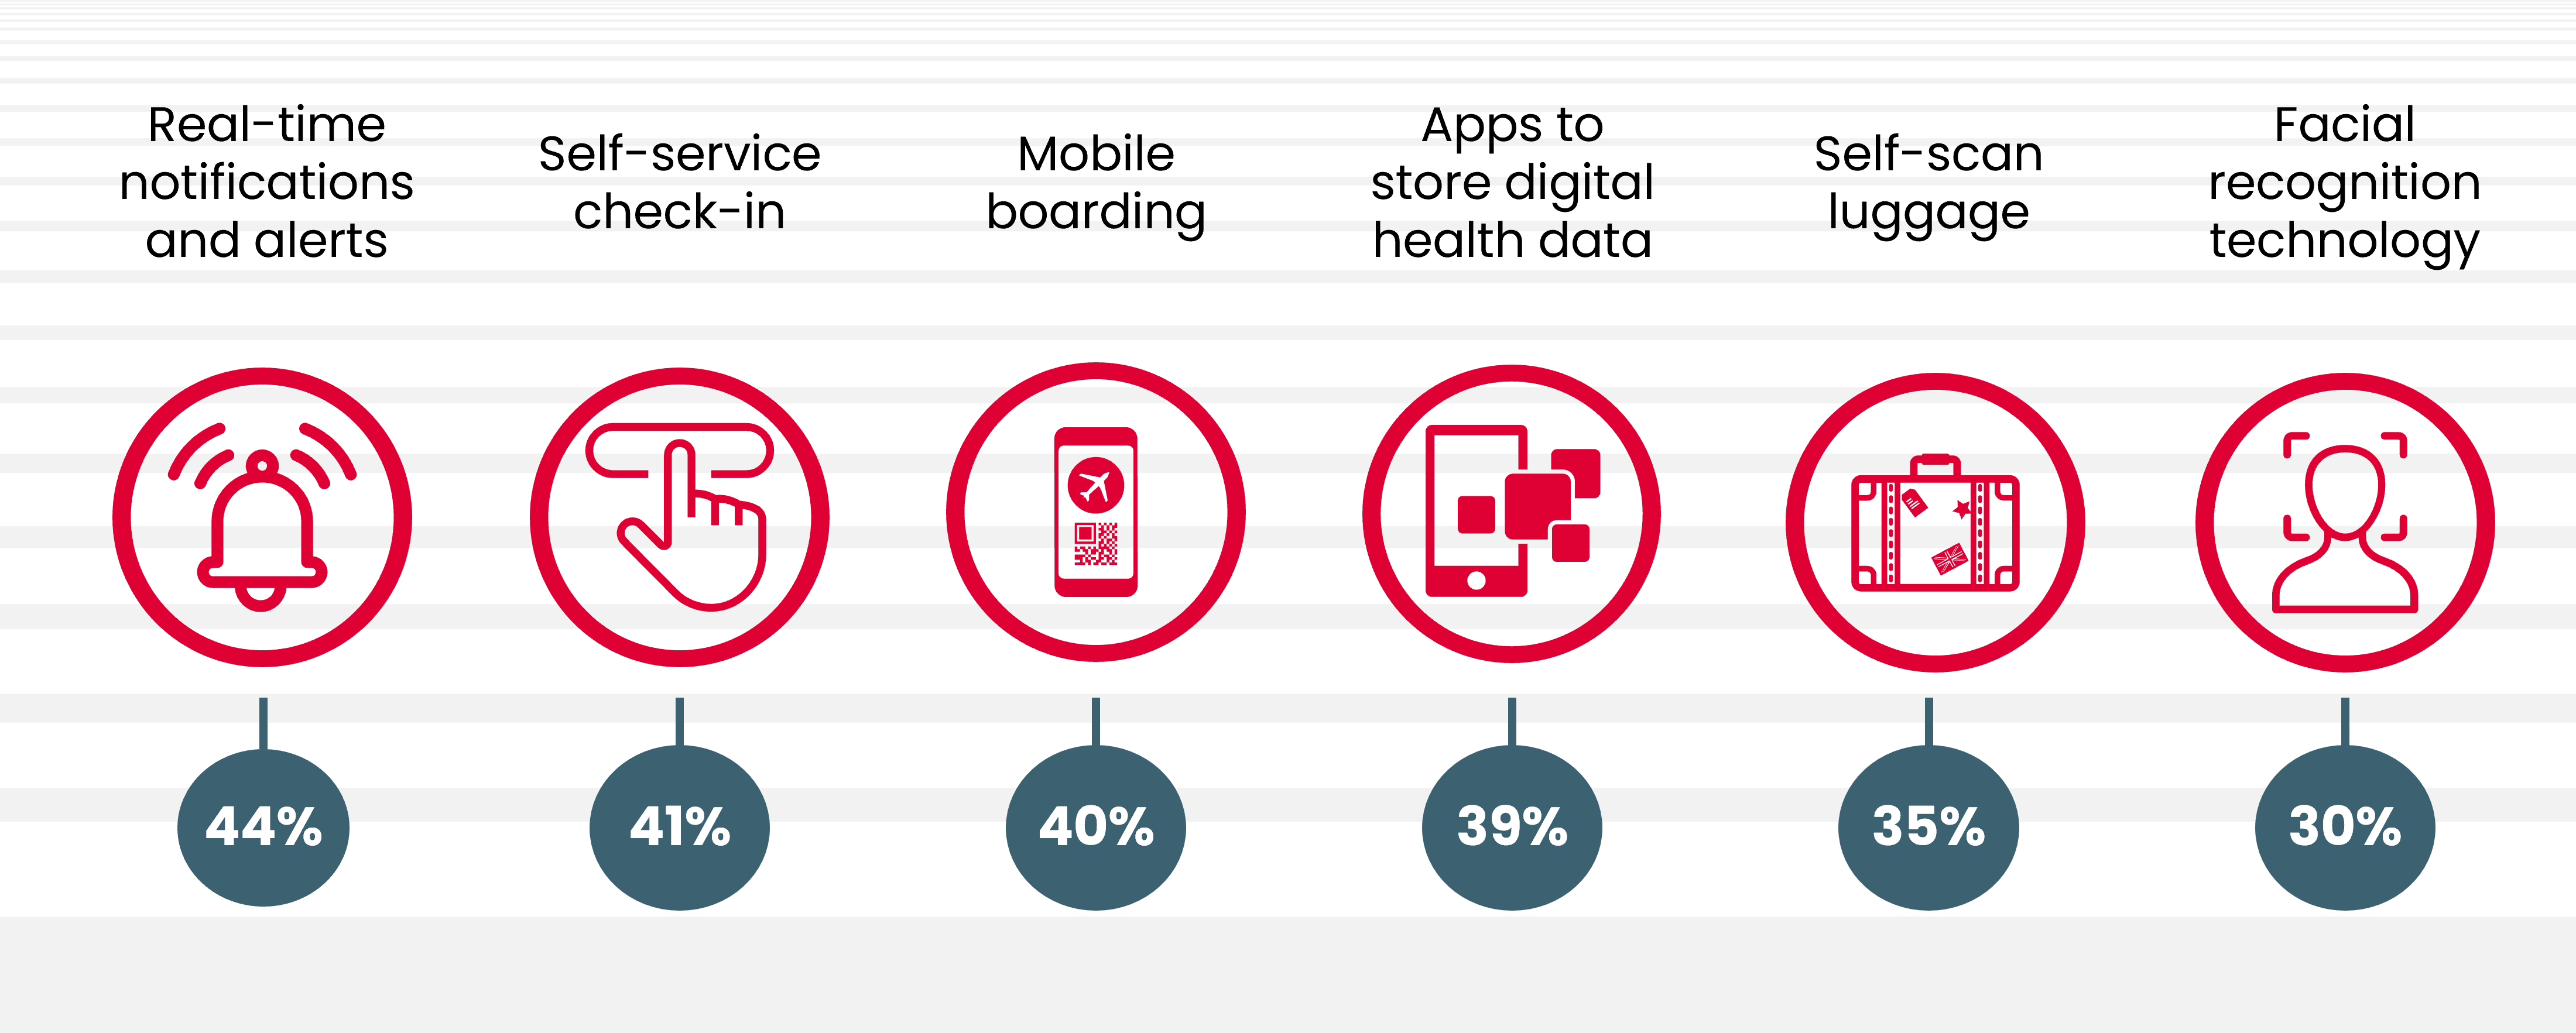 Real-time notifications and alerts, 44%. Self-service check-in, 41%. Mobile boarding, 40%. Apps to store digital health data, 39%. Self-scan luggage, 35%. Facial recognition technology, 30%.